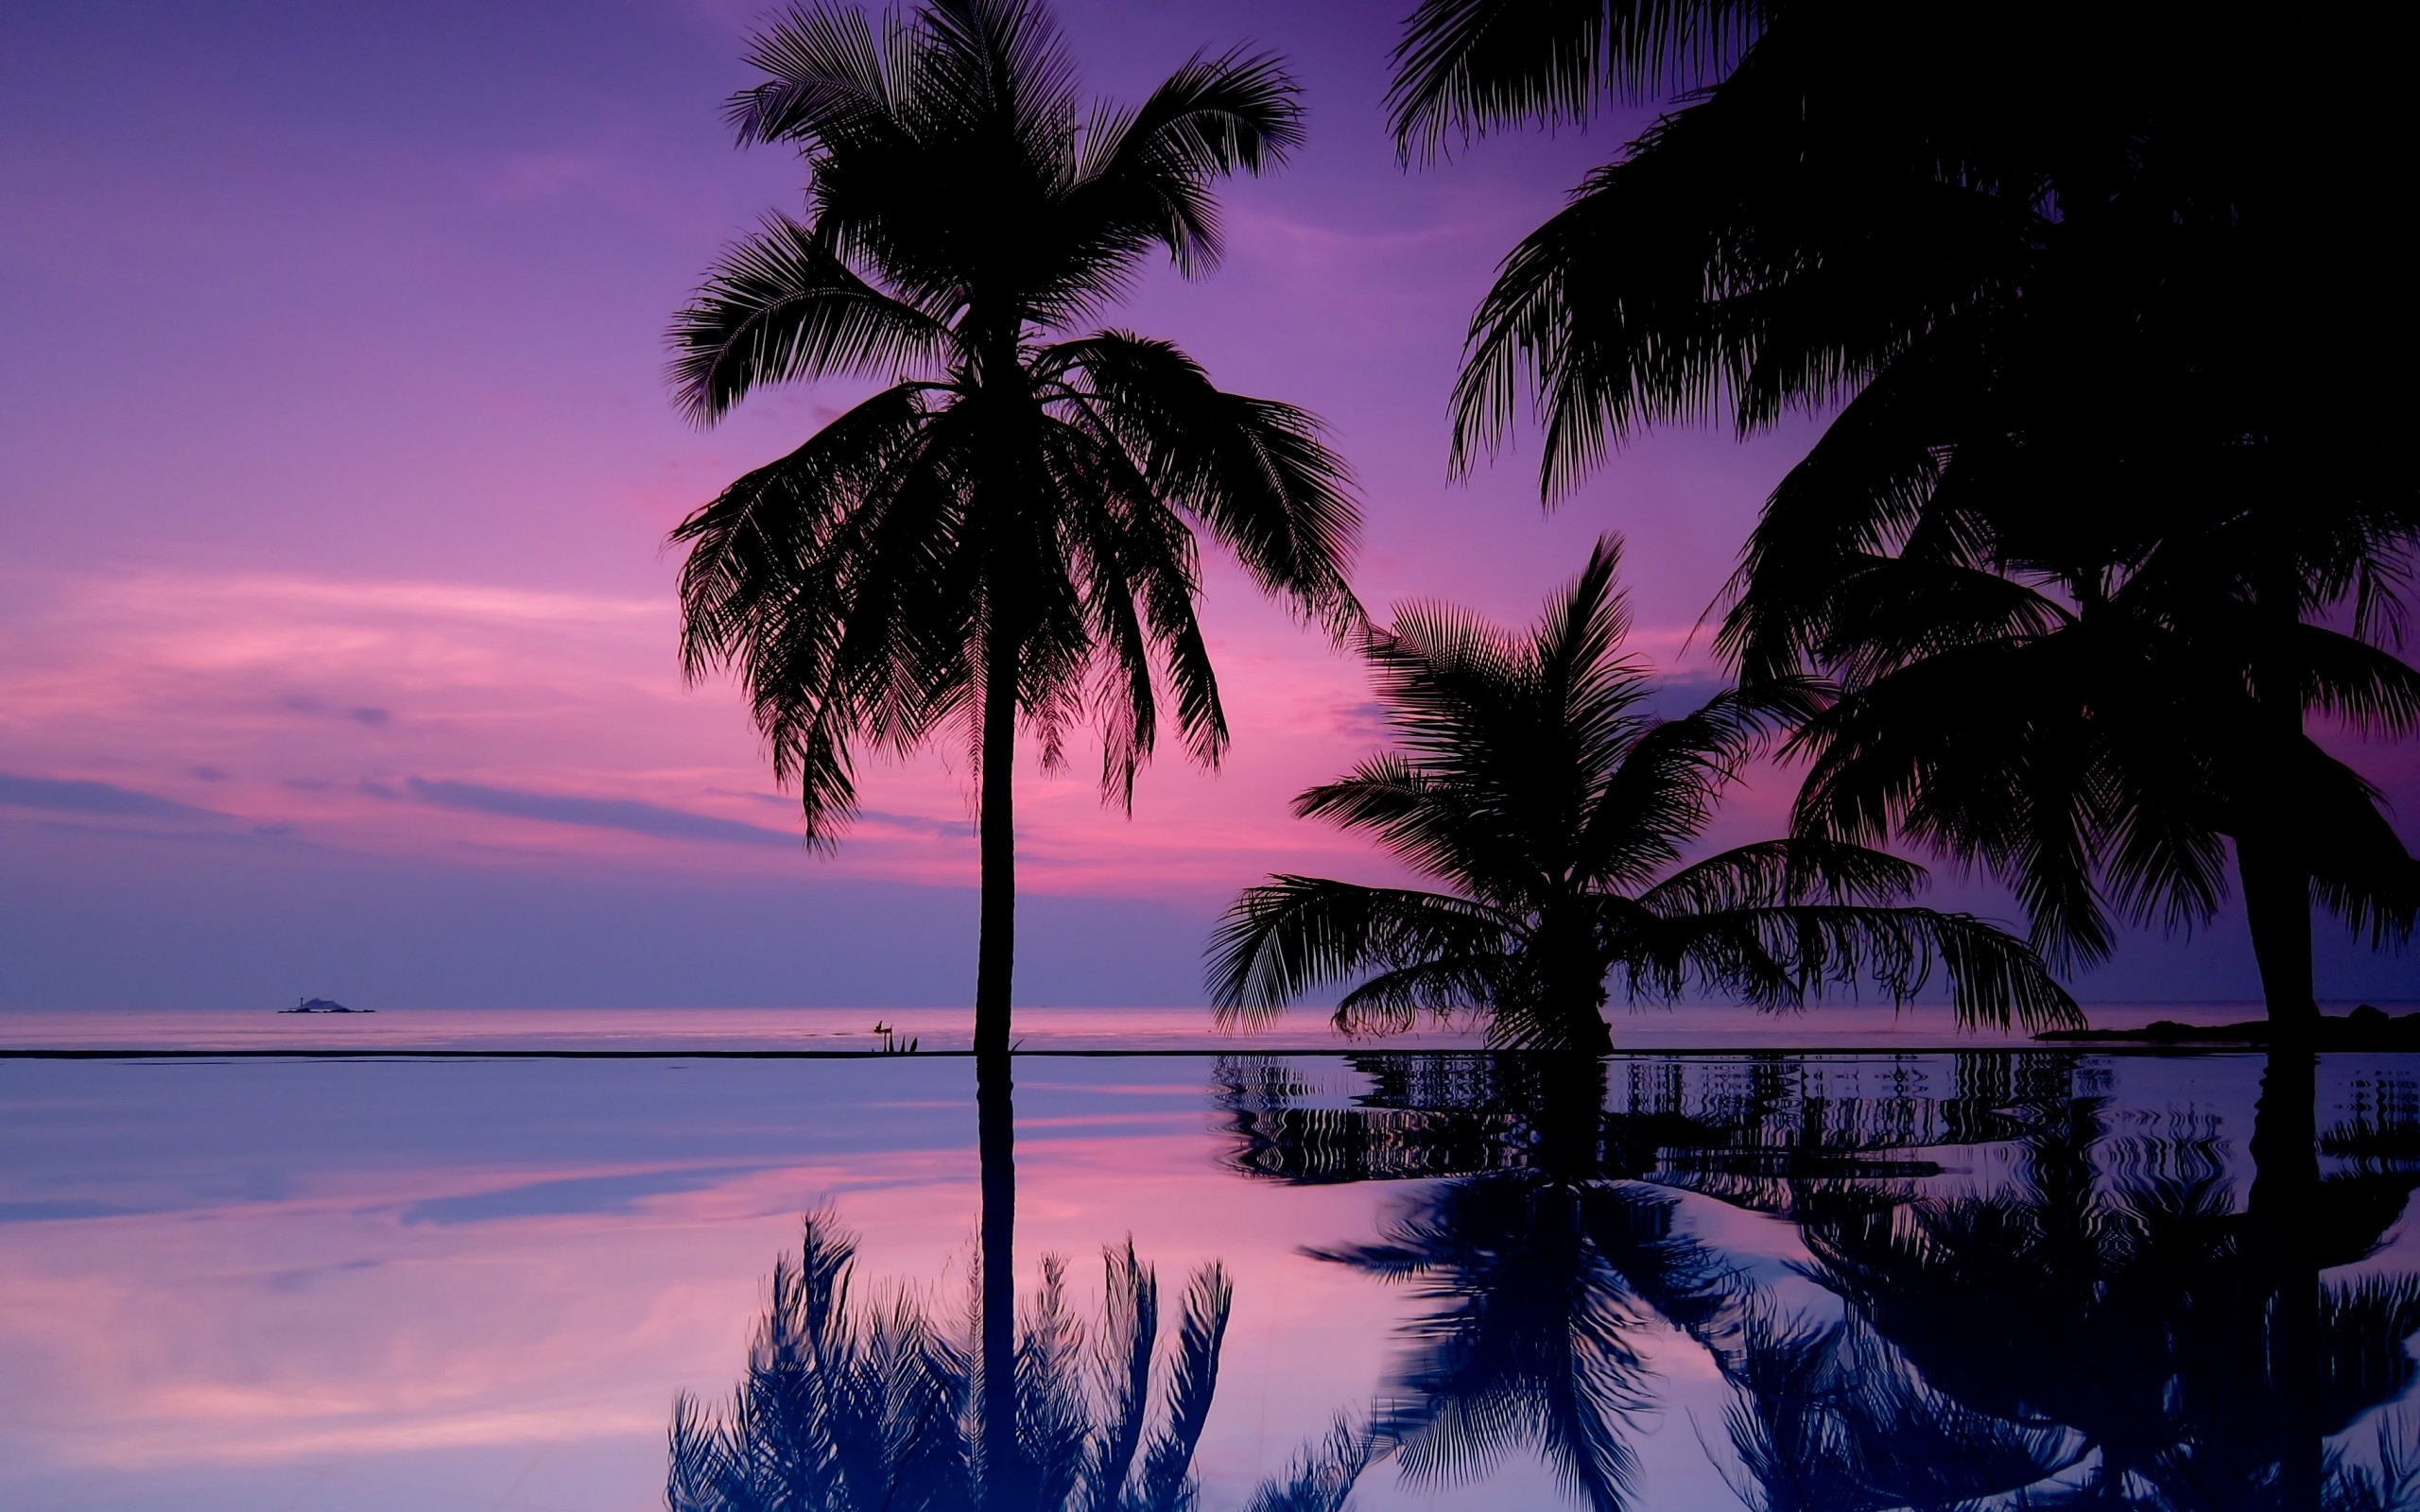 Download wallpaper 938x1668 palm trees sunset hawaii ocean horizon  iphone 876s6 for parallax hd background